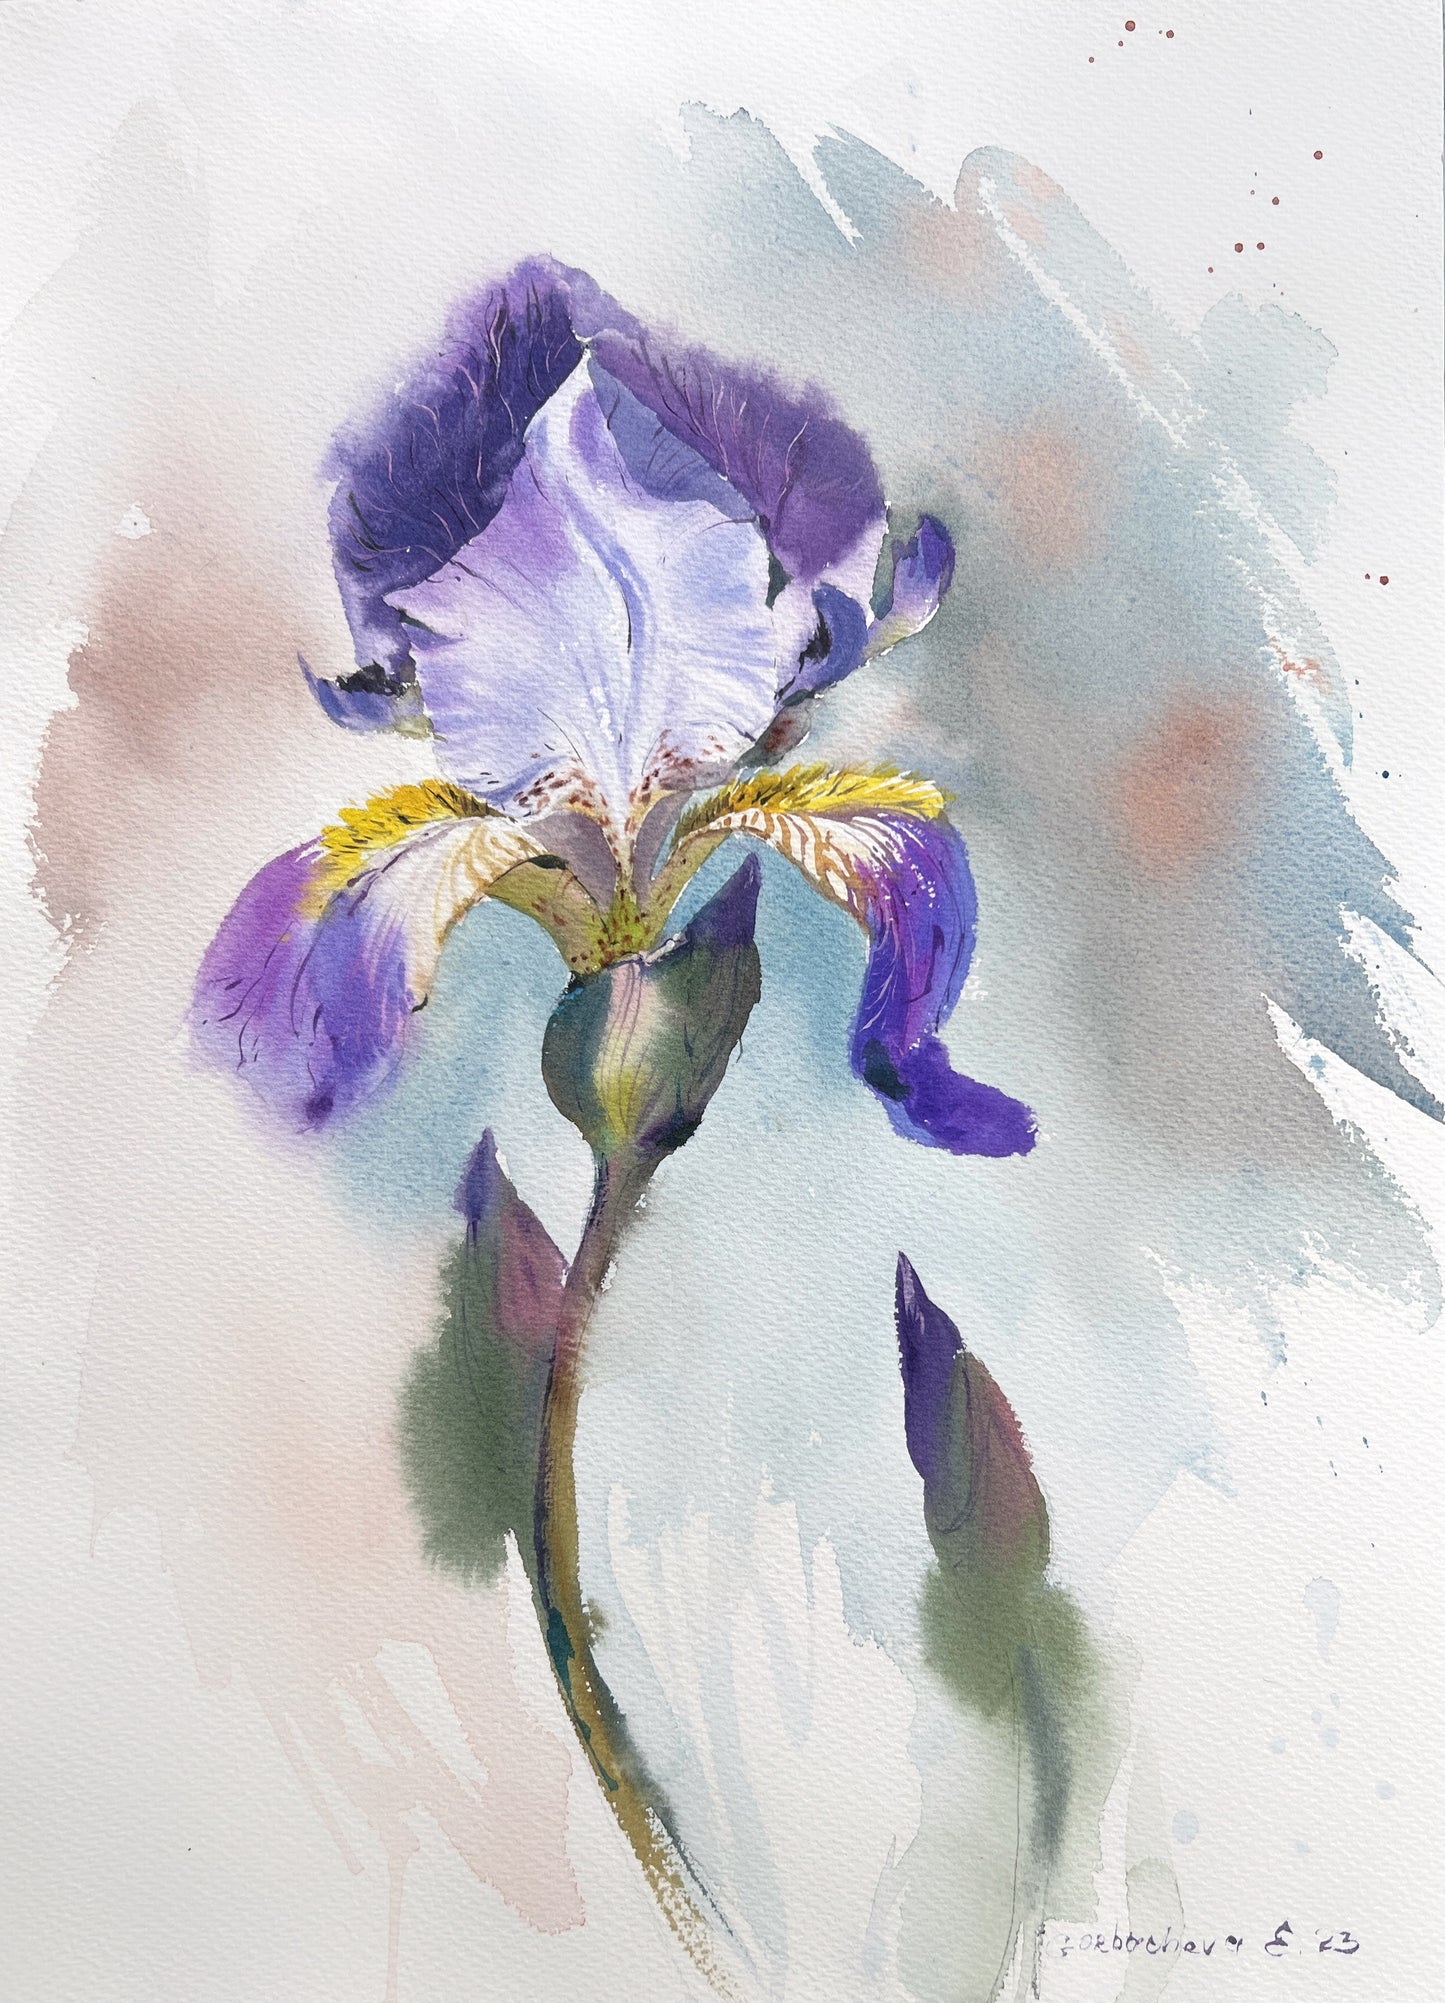 Iris Painting Original Watercolor, 16 by 11 inches, Purple Flower Wall Art, Handmade Floral Artwork Watercolor, Gift